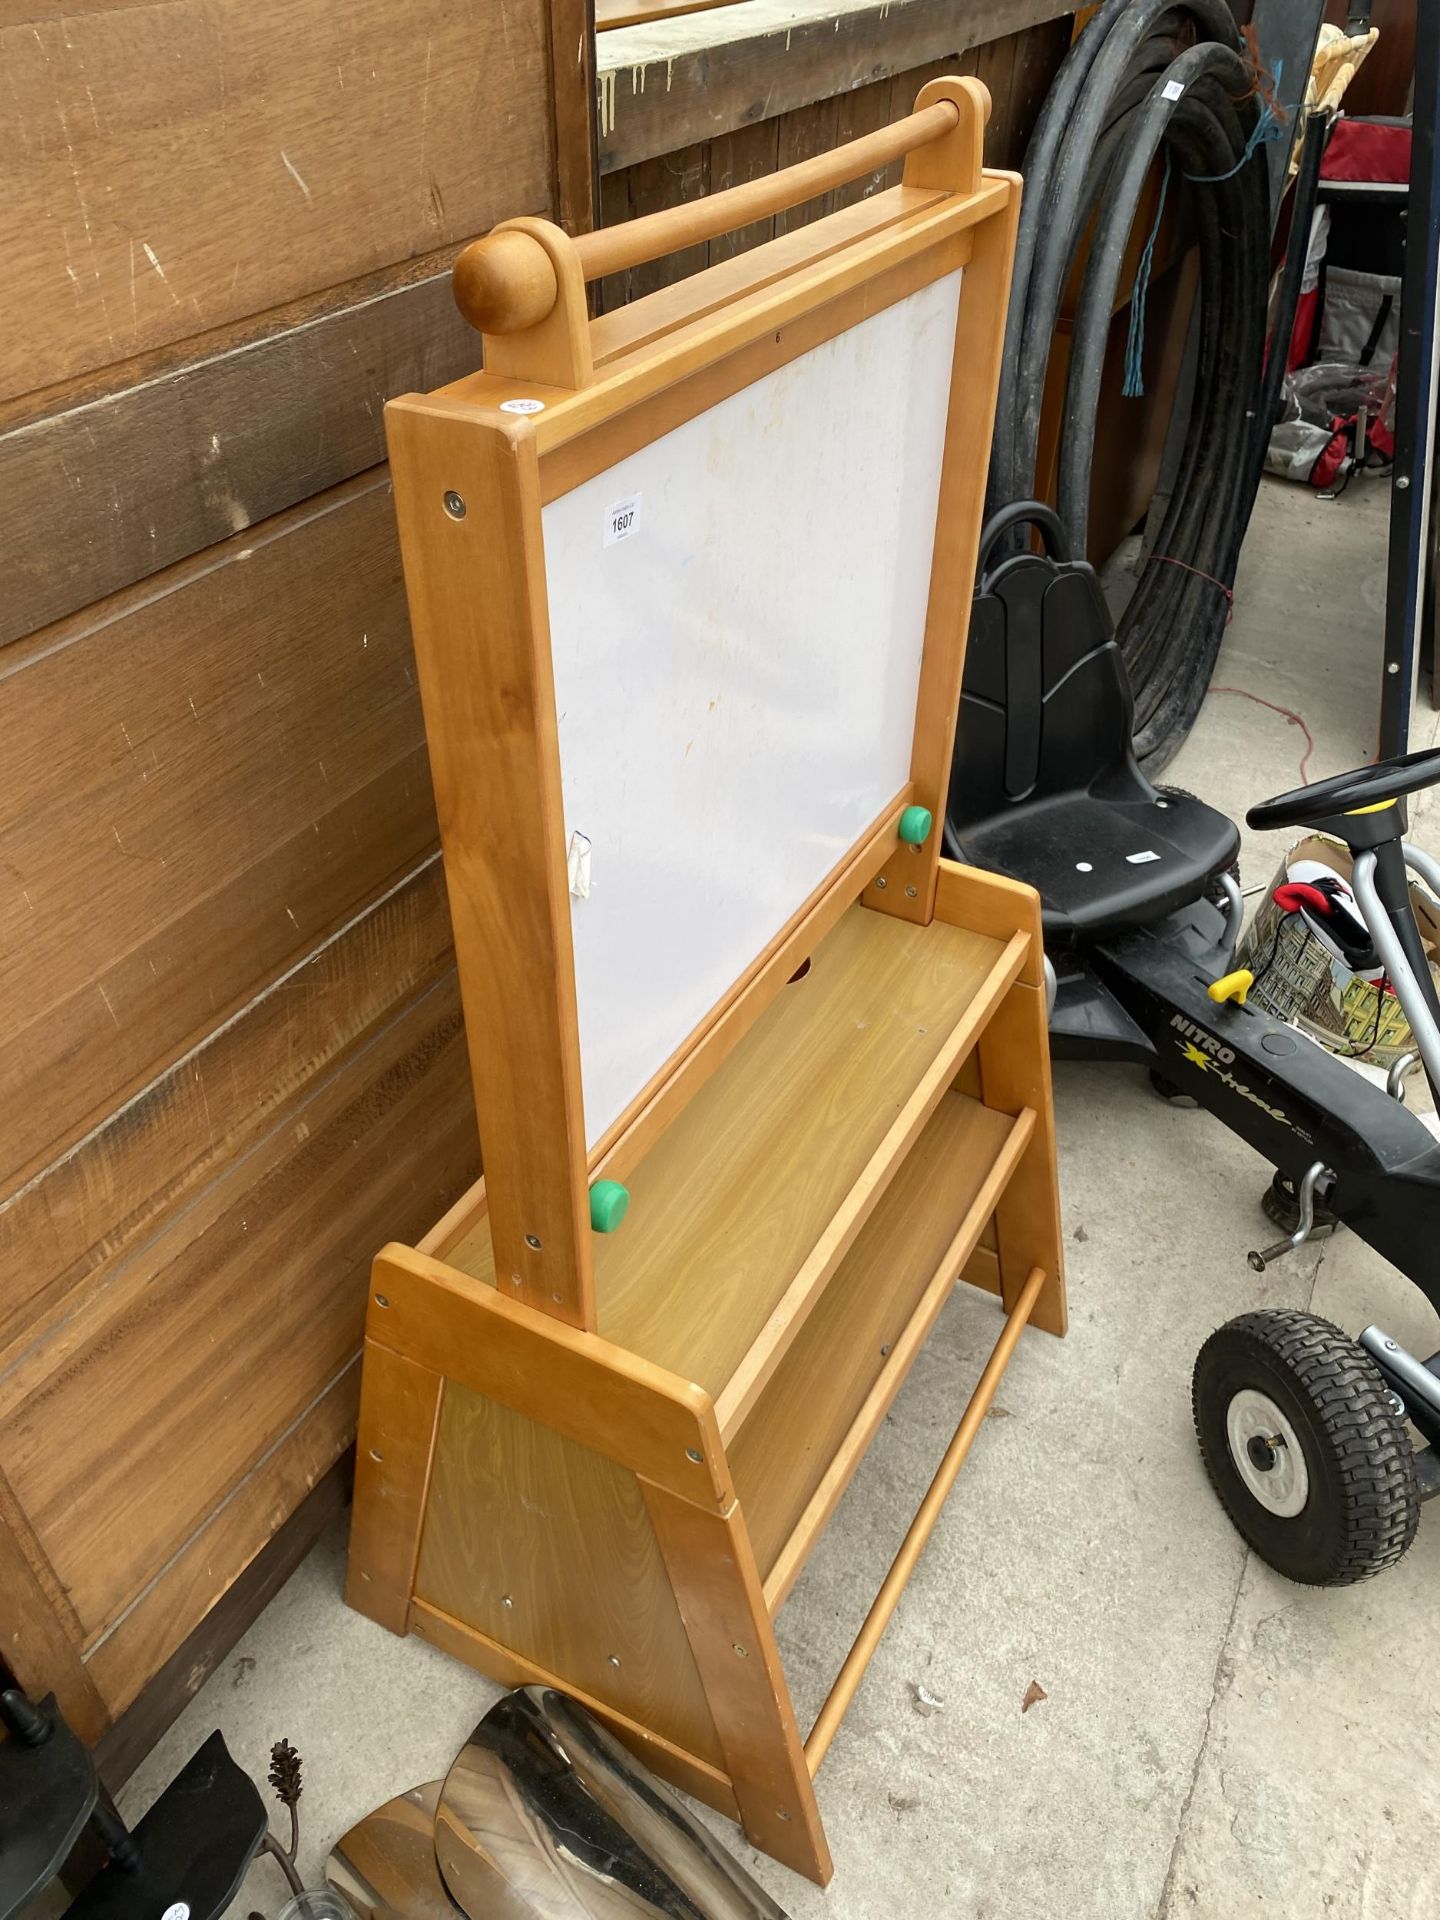 A CHILDRENS DRAWING BOARD AND TABLE - Image 2 of 3